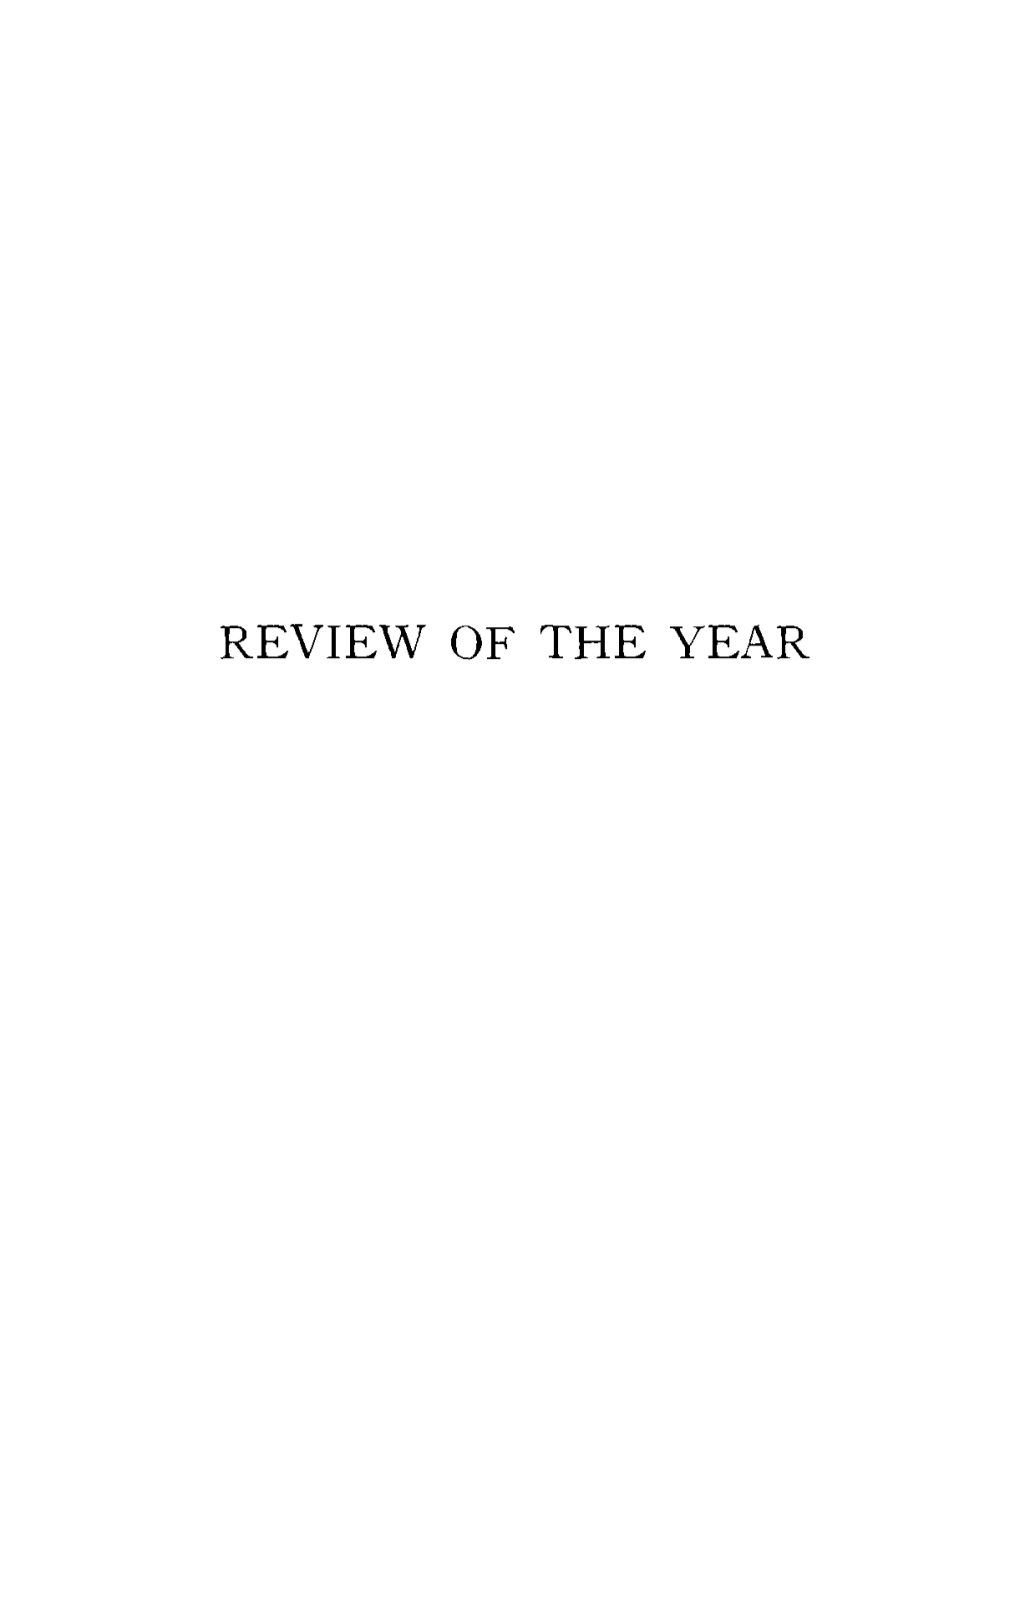 Review of the Year: United States (1939-1940)